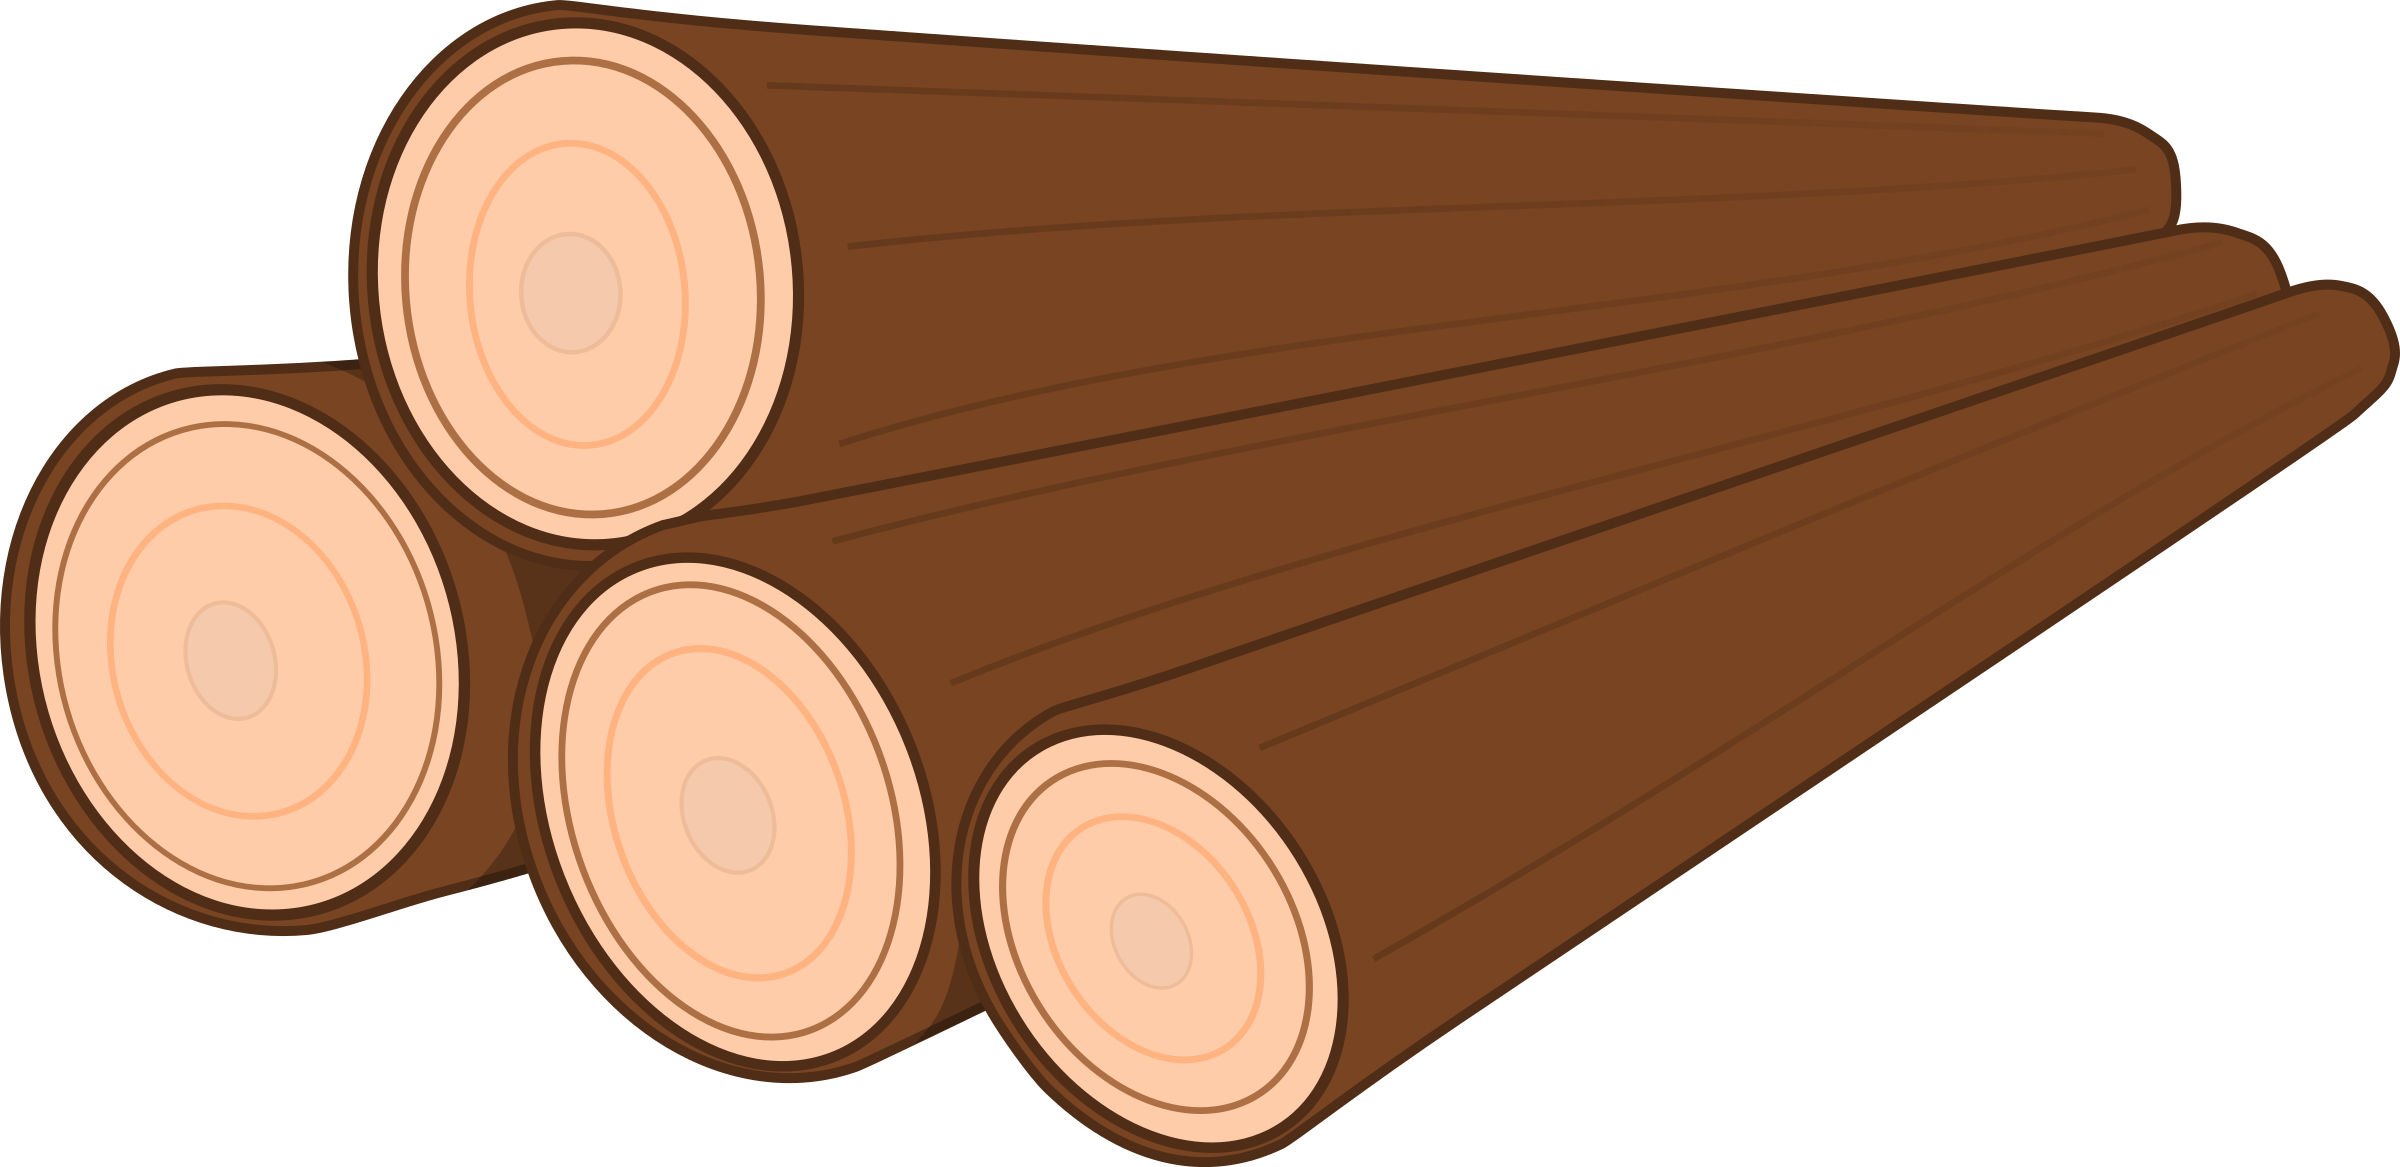 Pile of logs clipart